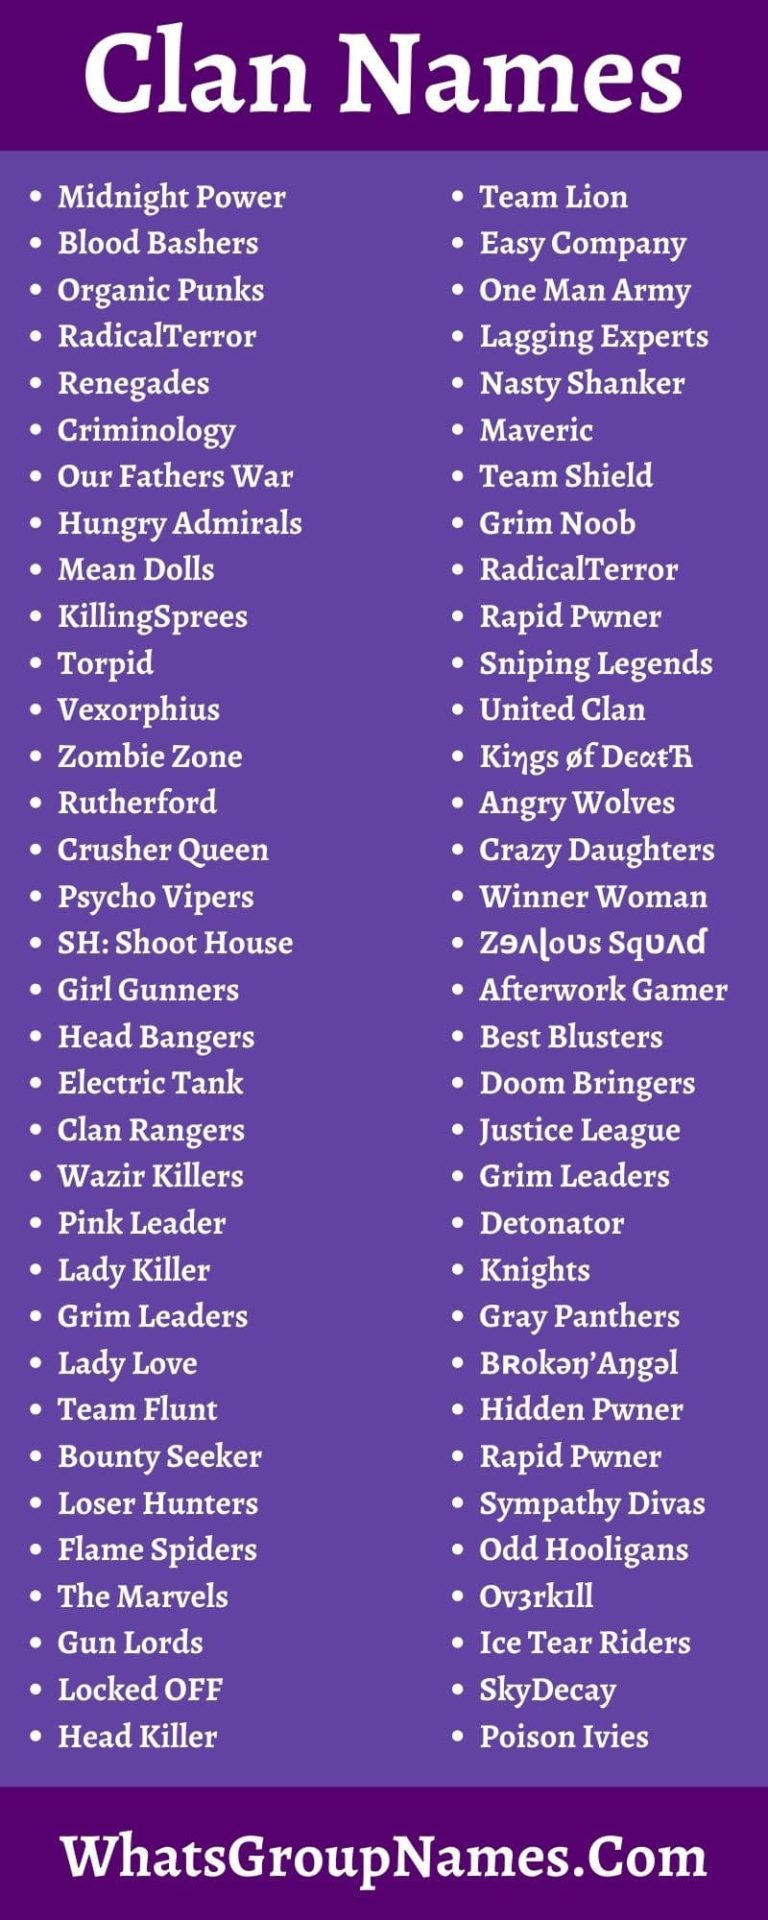 Best Clan Names For Funny, Cool, Badass, Creative, Sweaty & Epic [2021]